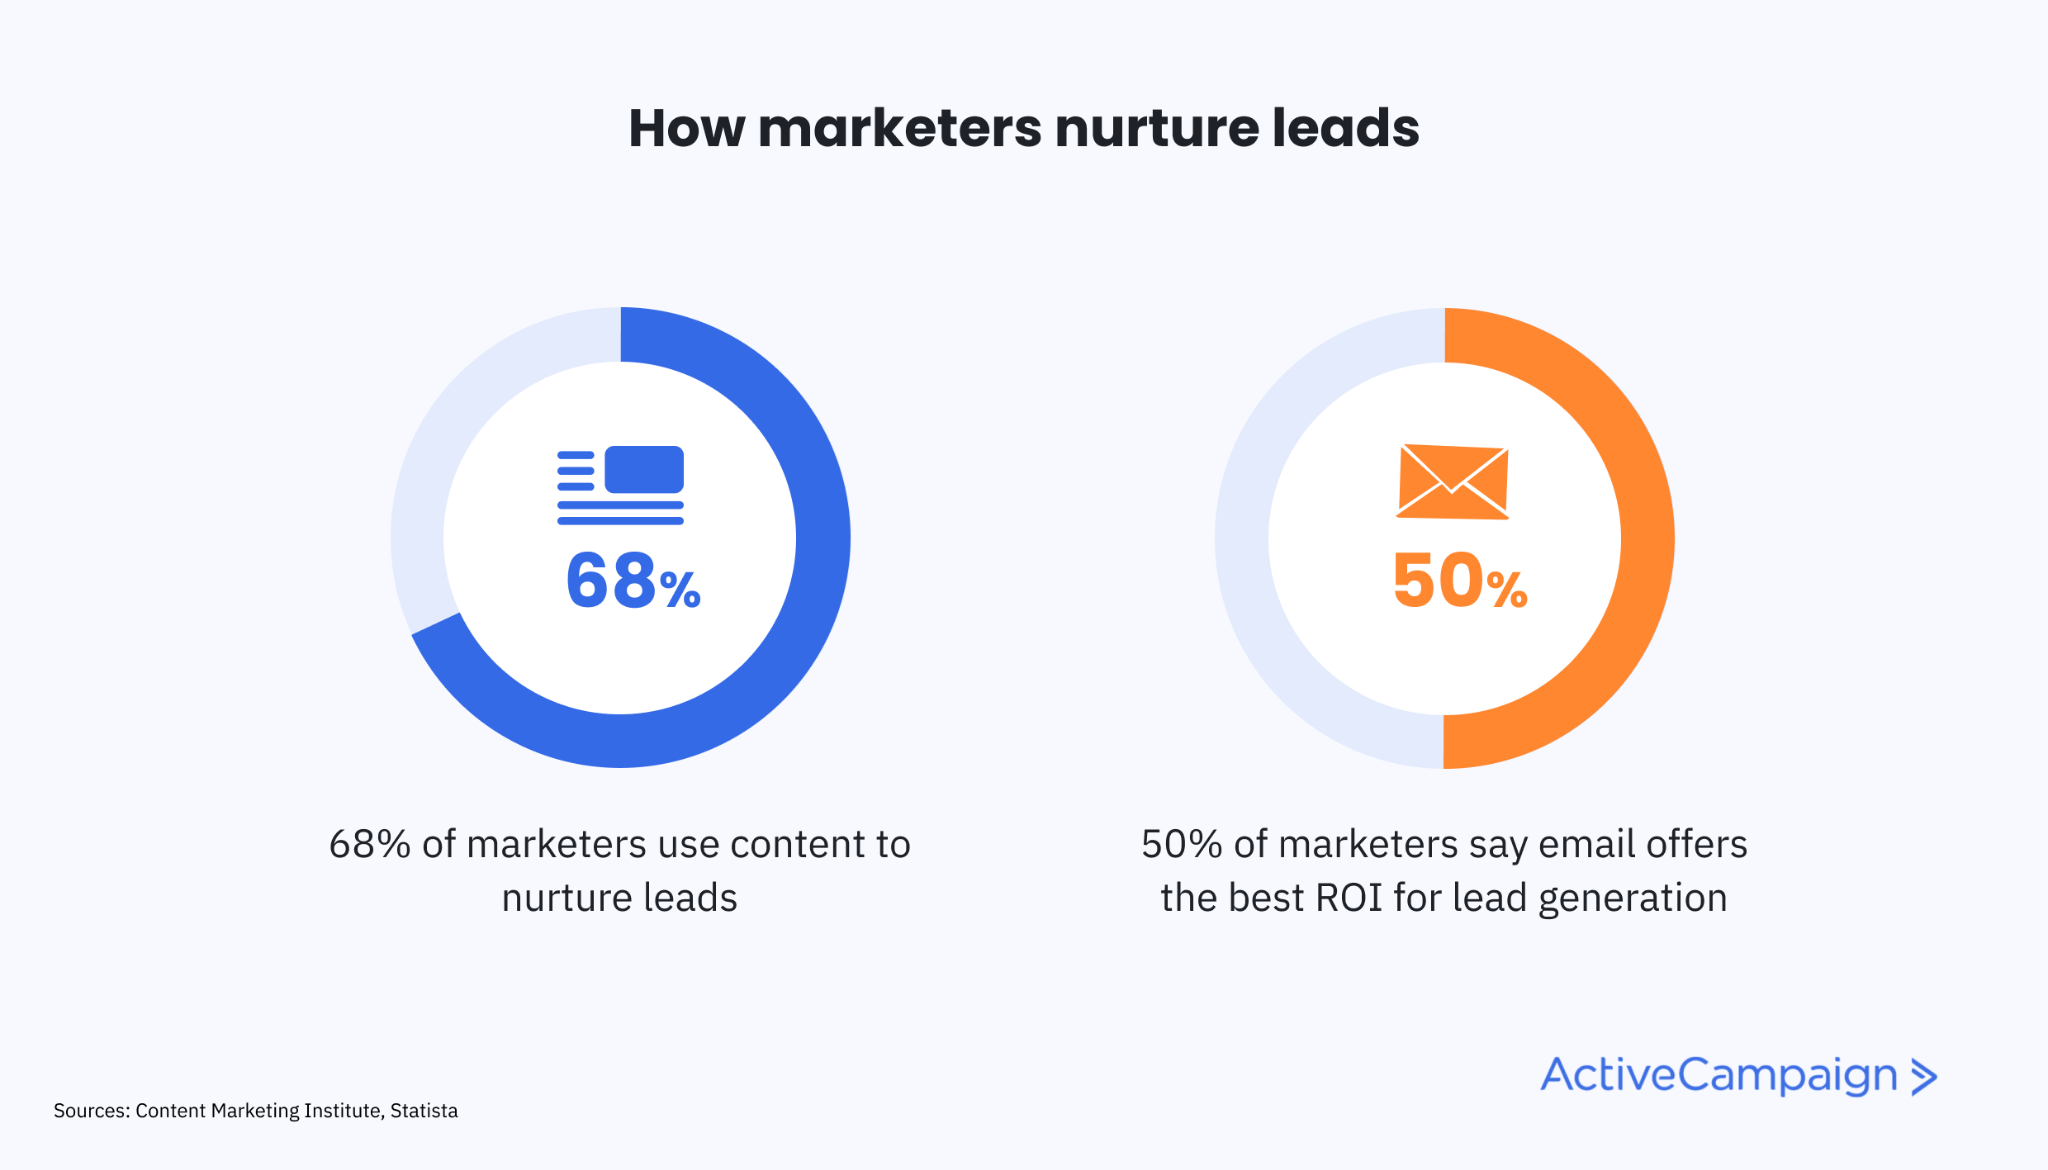 pie charts showing that 68% of marketers use content to nurture leads and 50% say email is the best channel for lead gen ROI